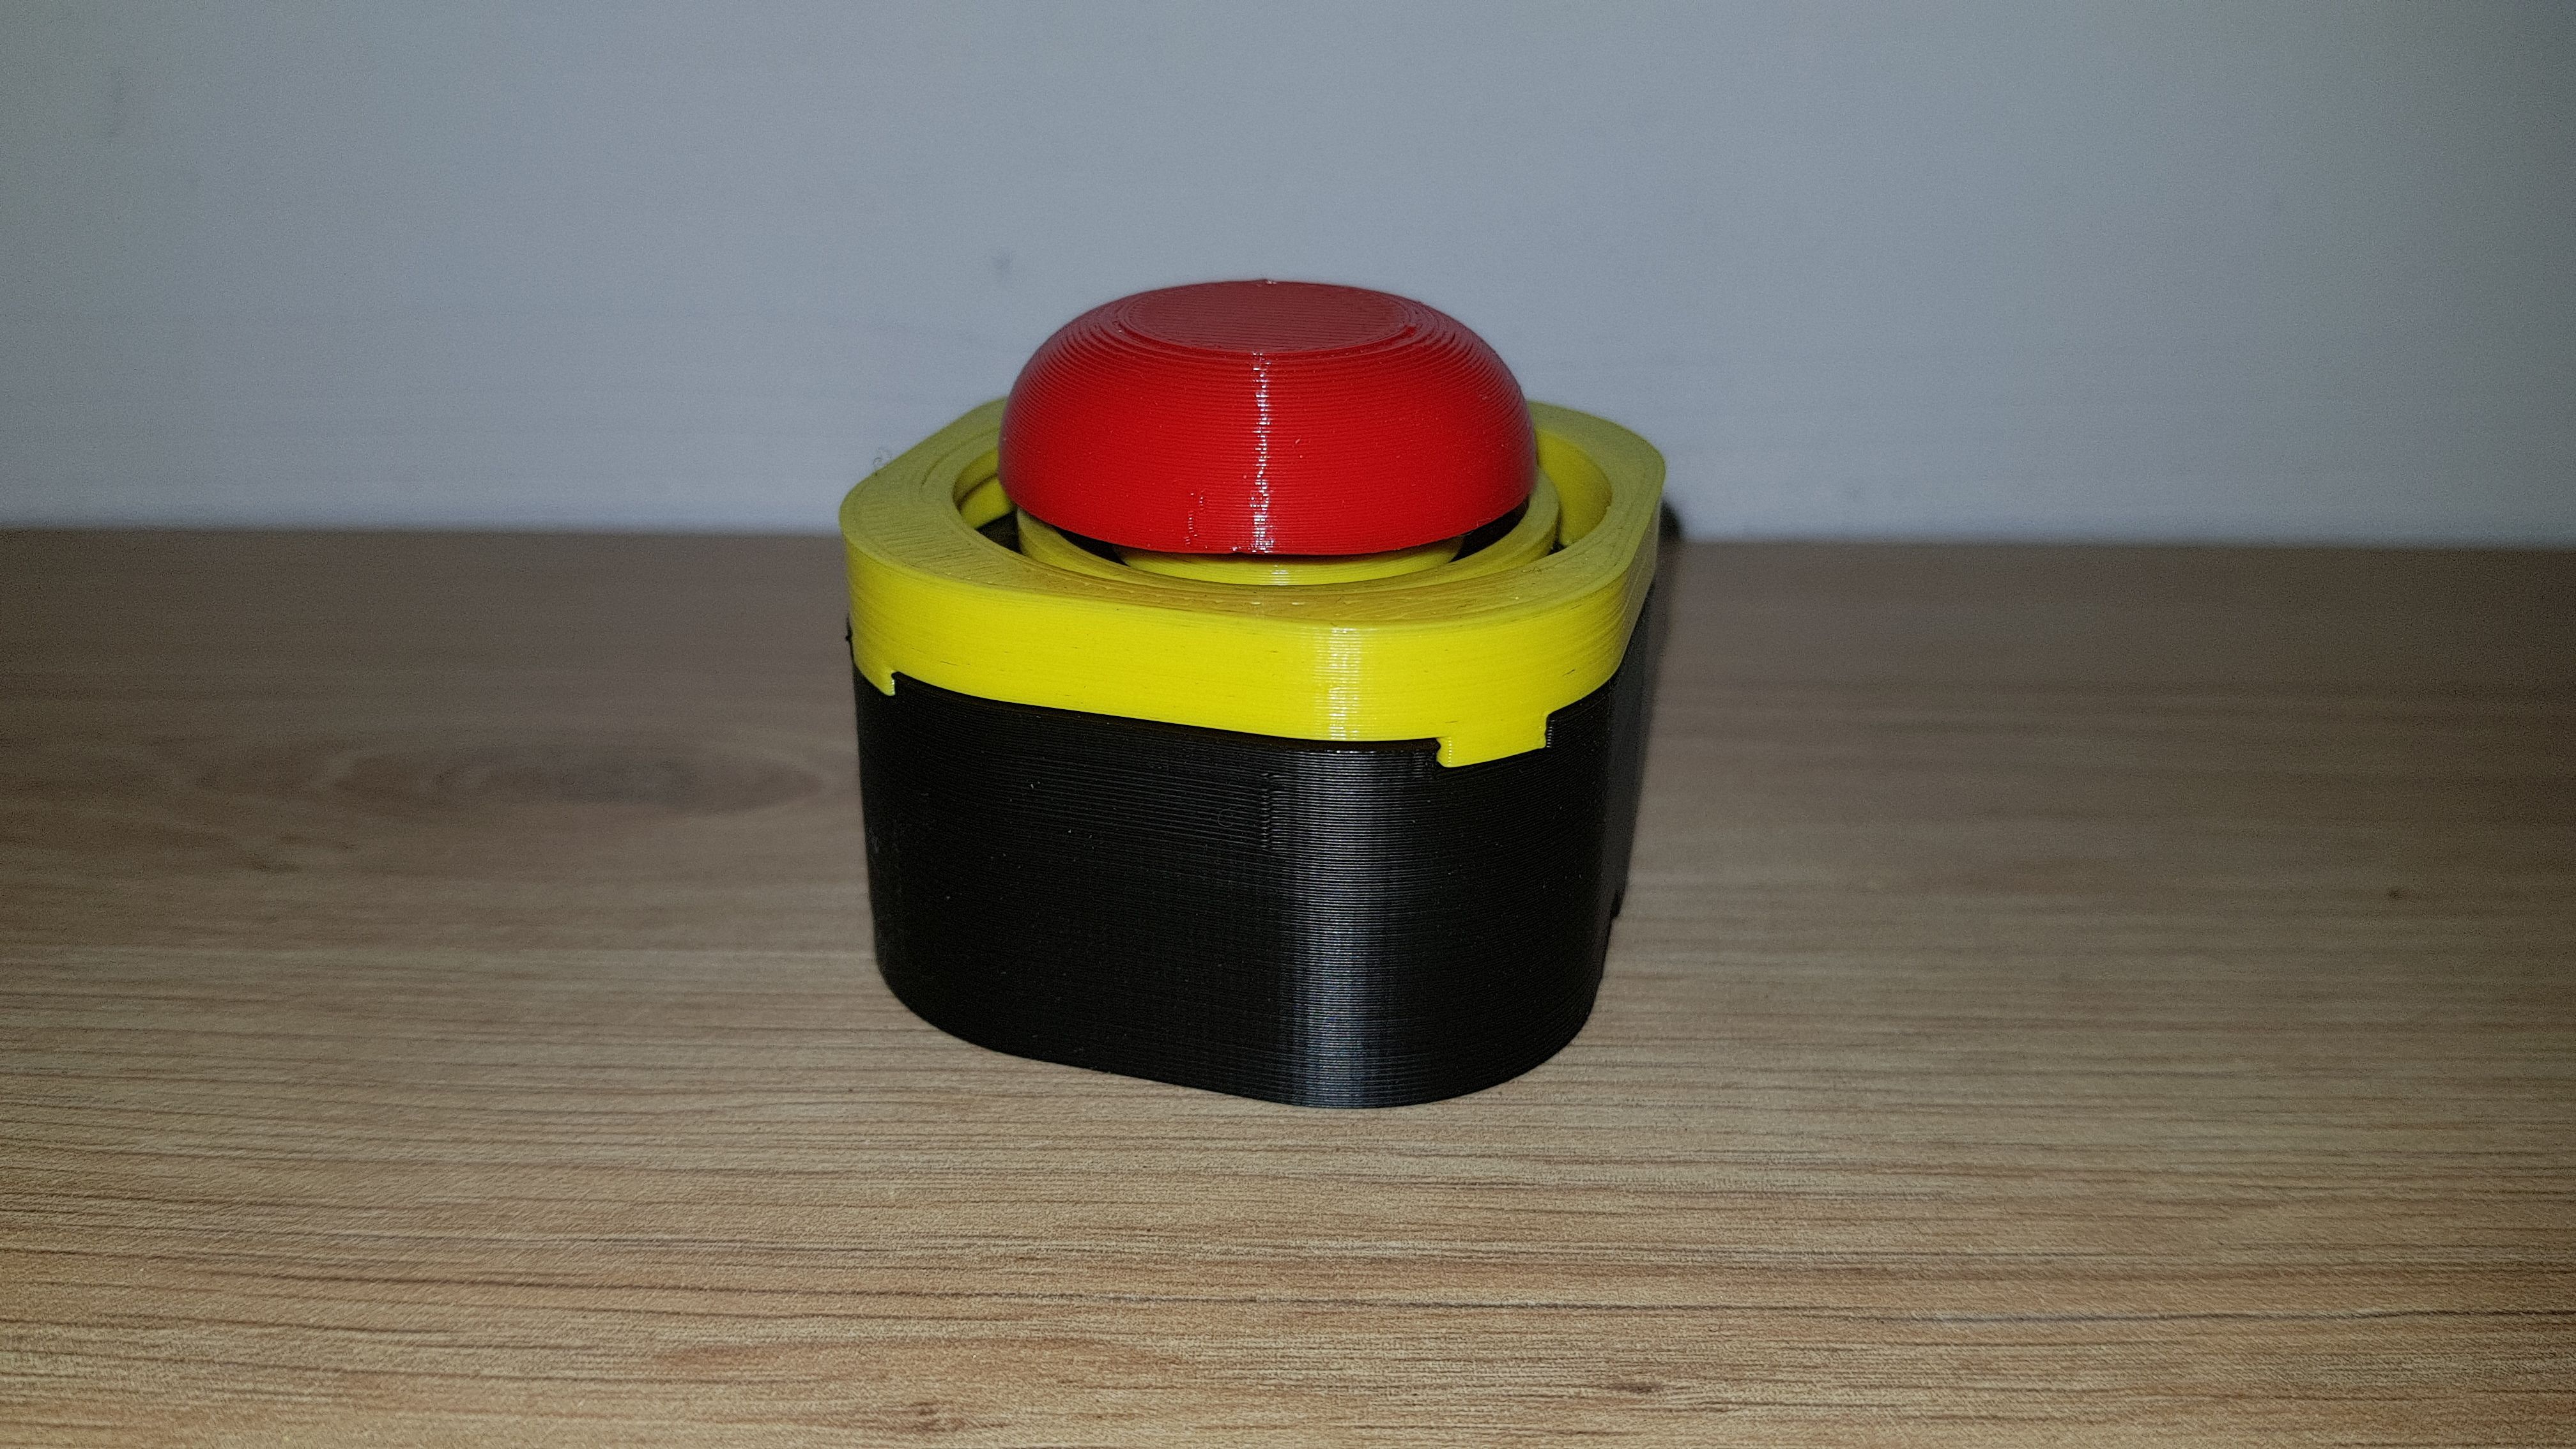 20200930_180507.jpg Download free STL file Emergency button for limit switch / buzzer • 3D print design, Heliox